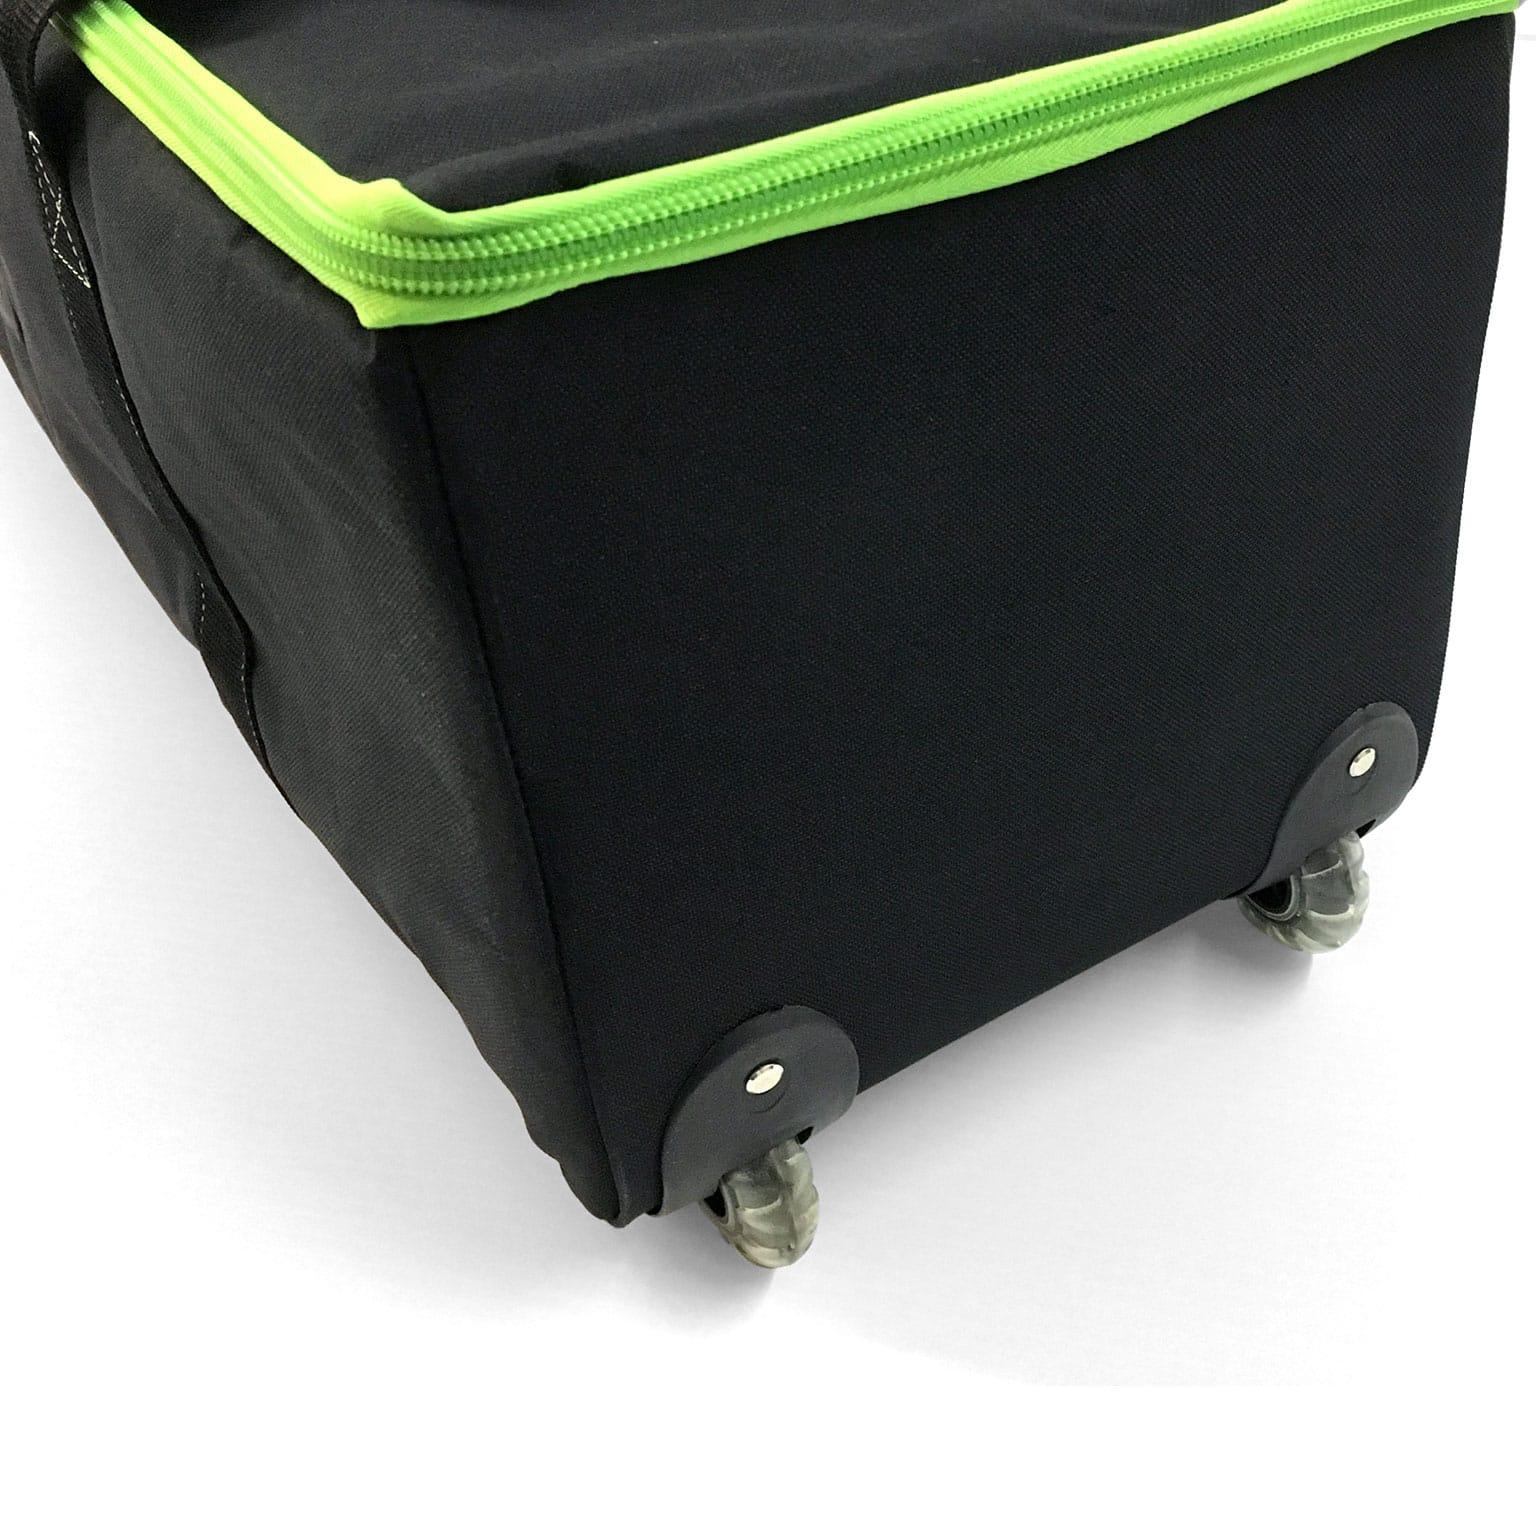 Small Wheeled Bag TRB018 - For Pop-Ups